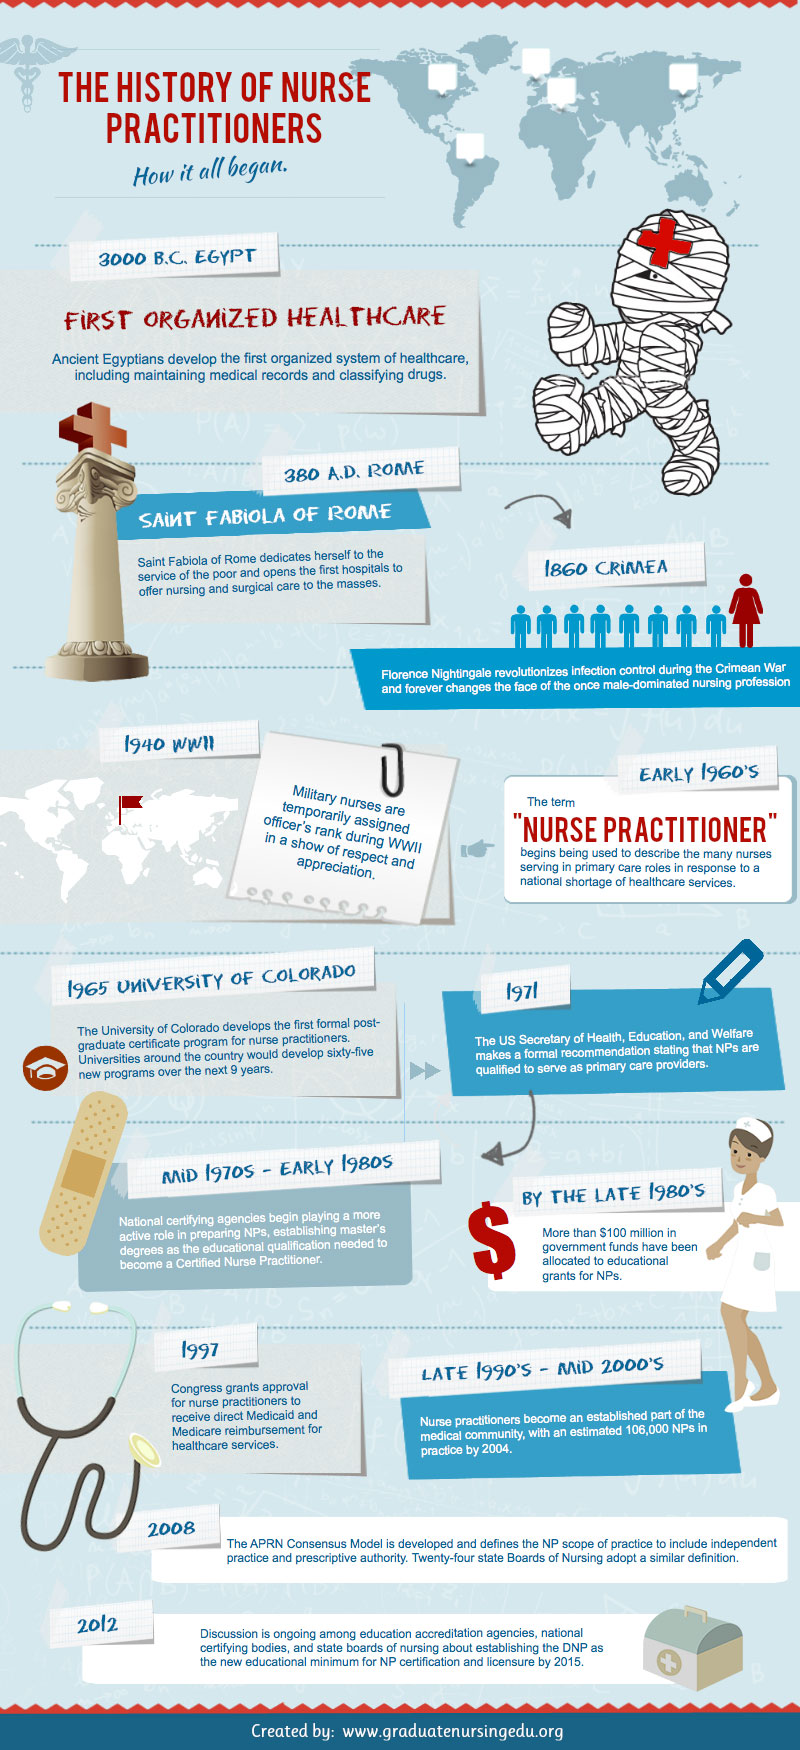 The History of Nurse Practitioners